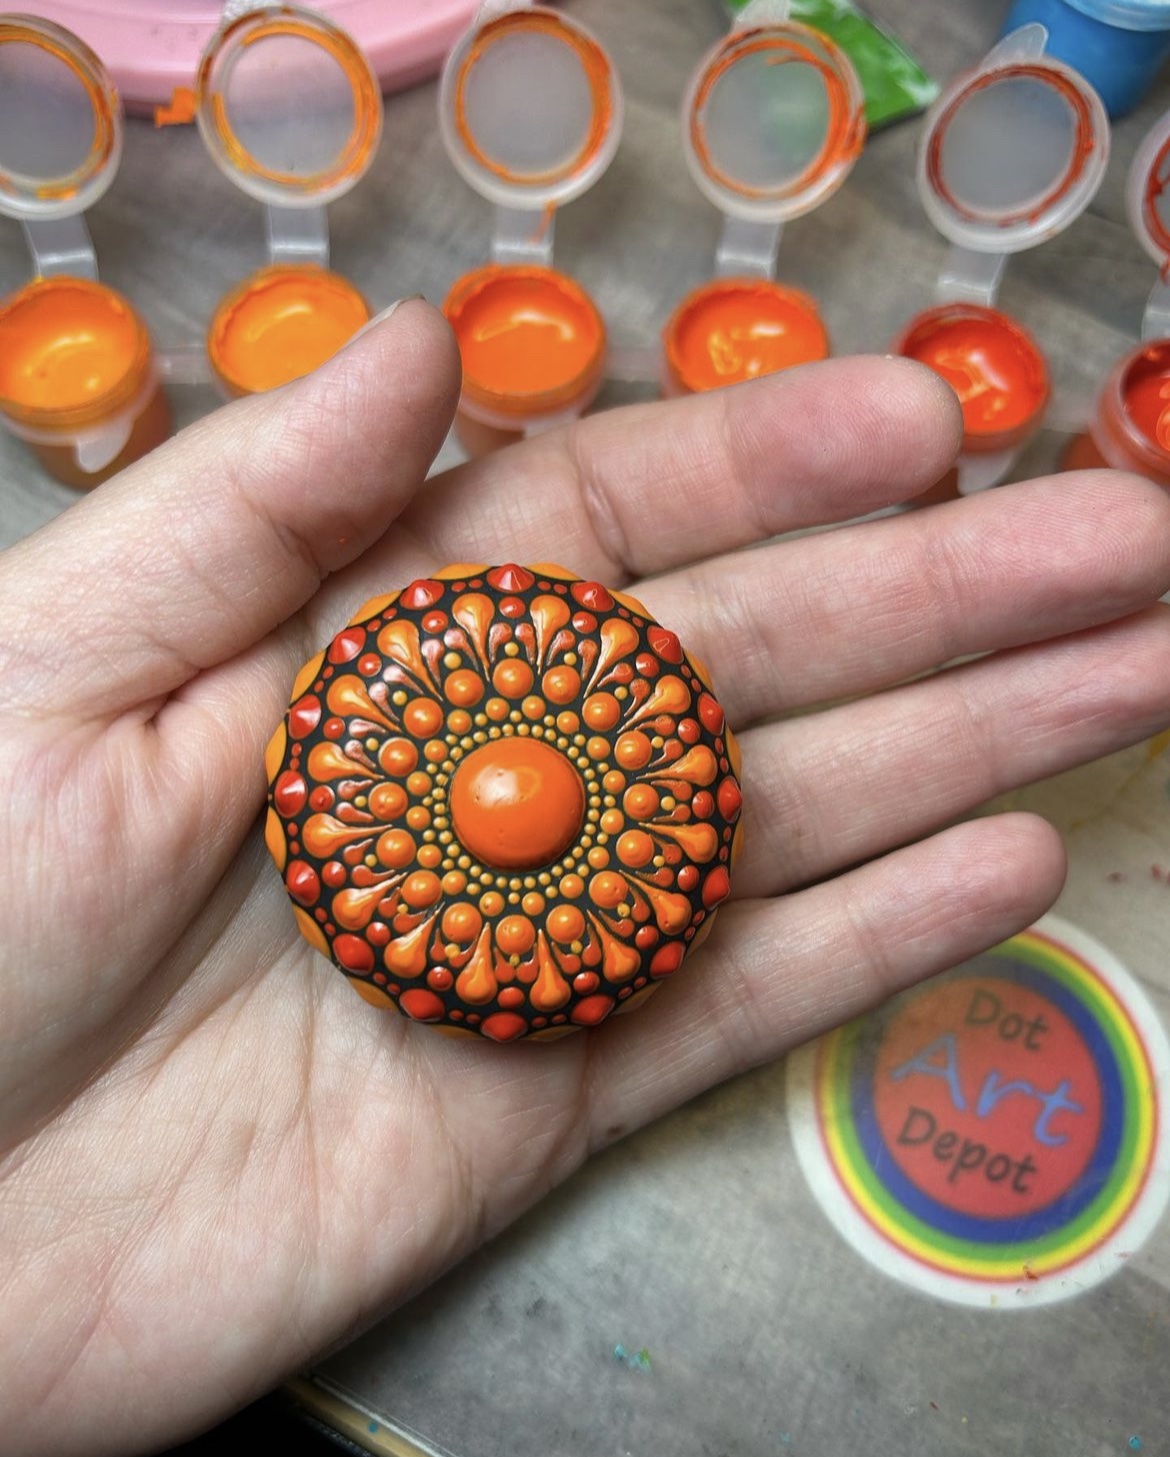 VERY Very SMALL DISC Silicone Mold 24 Cavity Disc Shaped Silicone Mold for  Gypsum/cement Globe Shaped Rocks for Rock Painting Dot Mandalas 